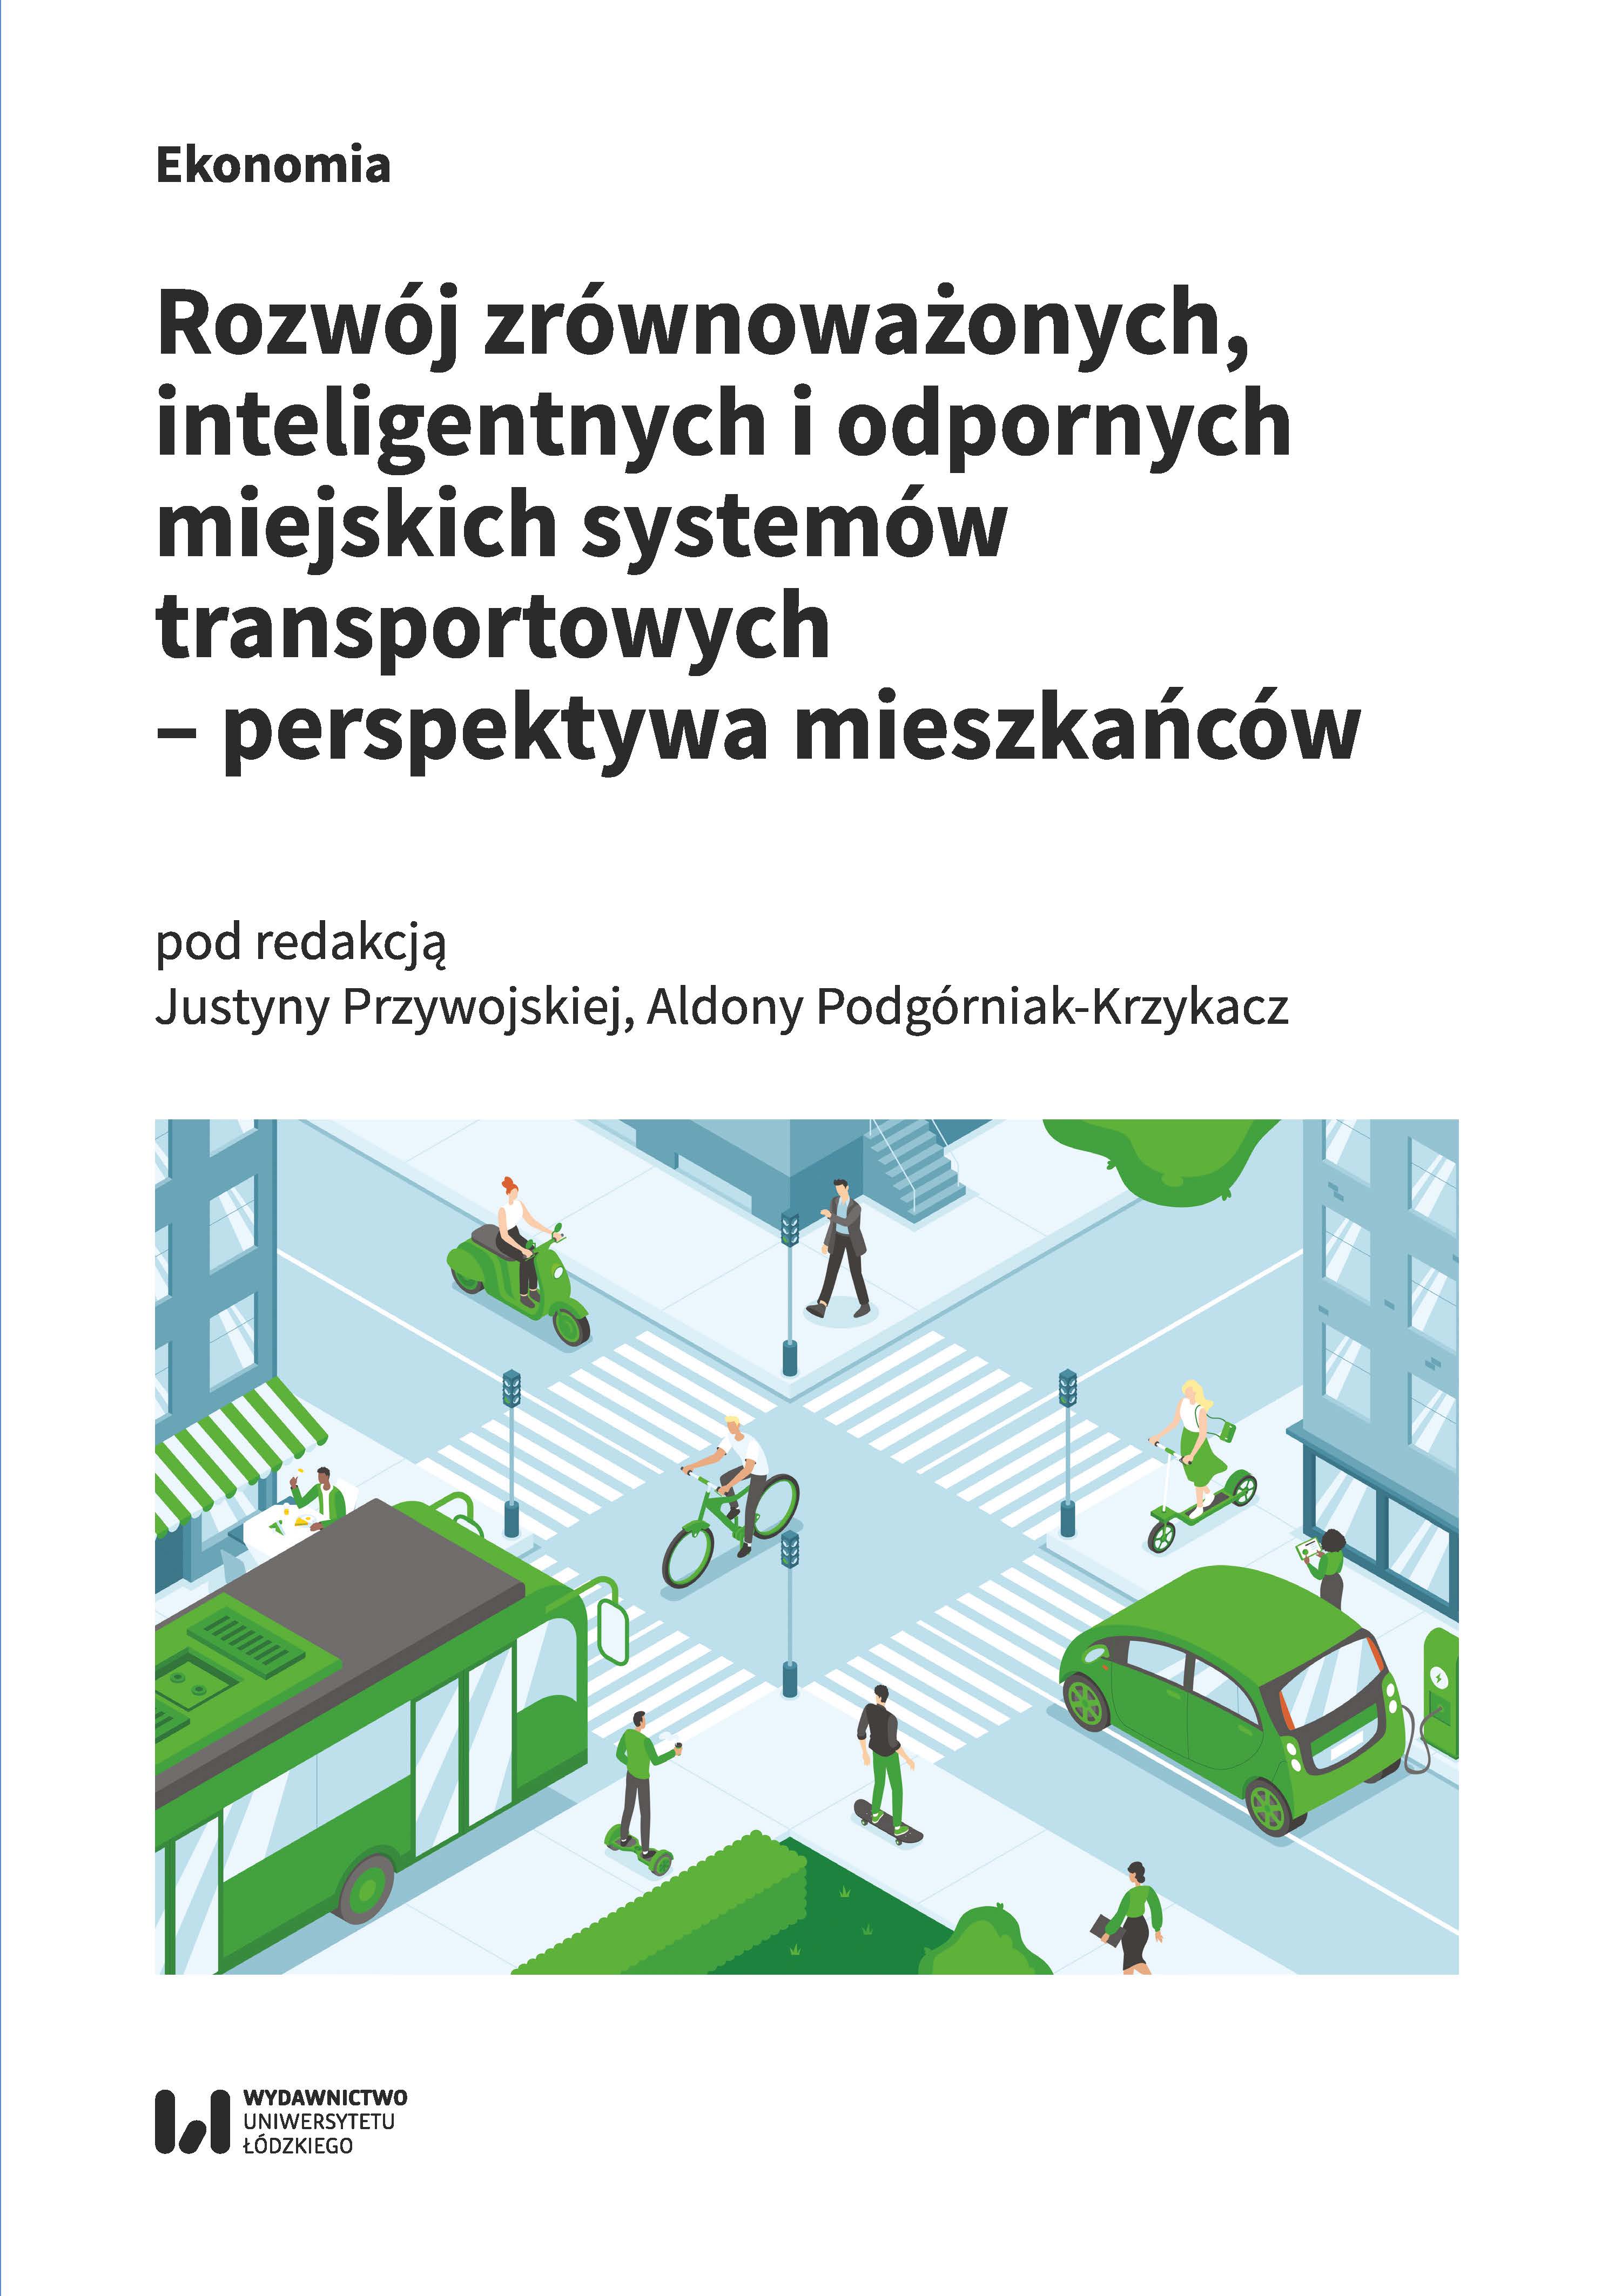 Development of electromobility in Poland: analysis of the social perception and acceptance of electric cars by Poles Cover Image